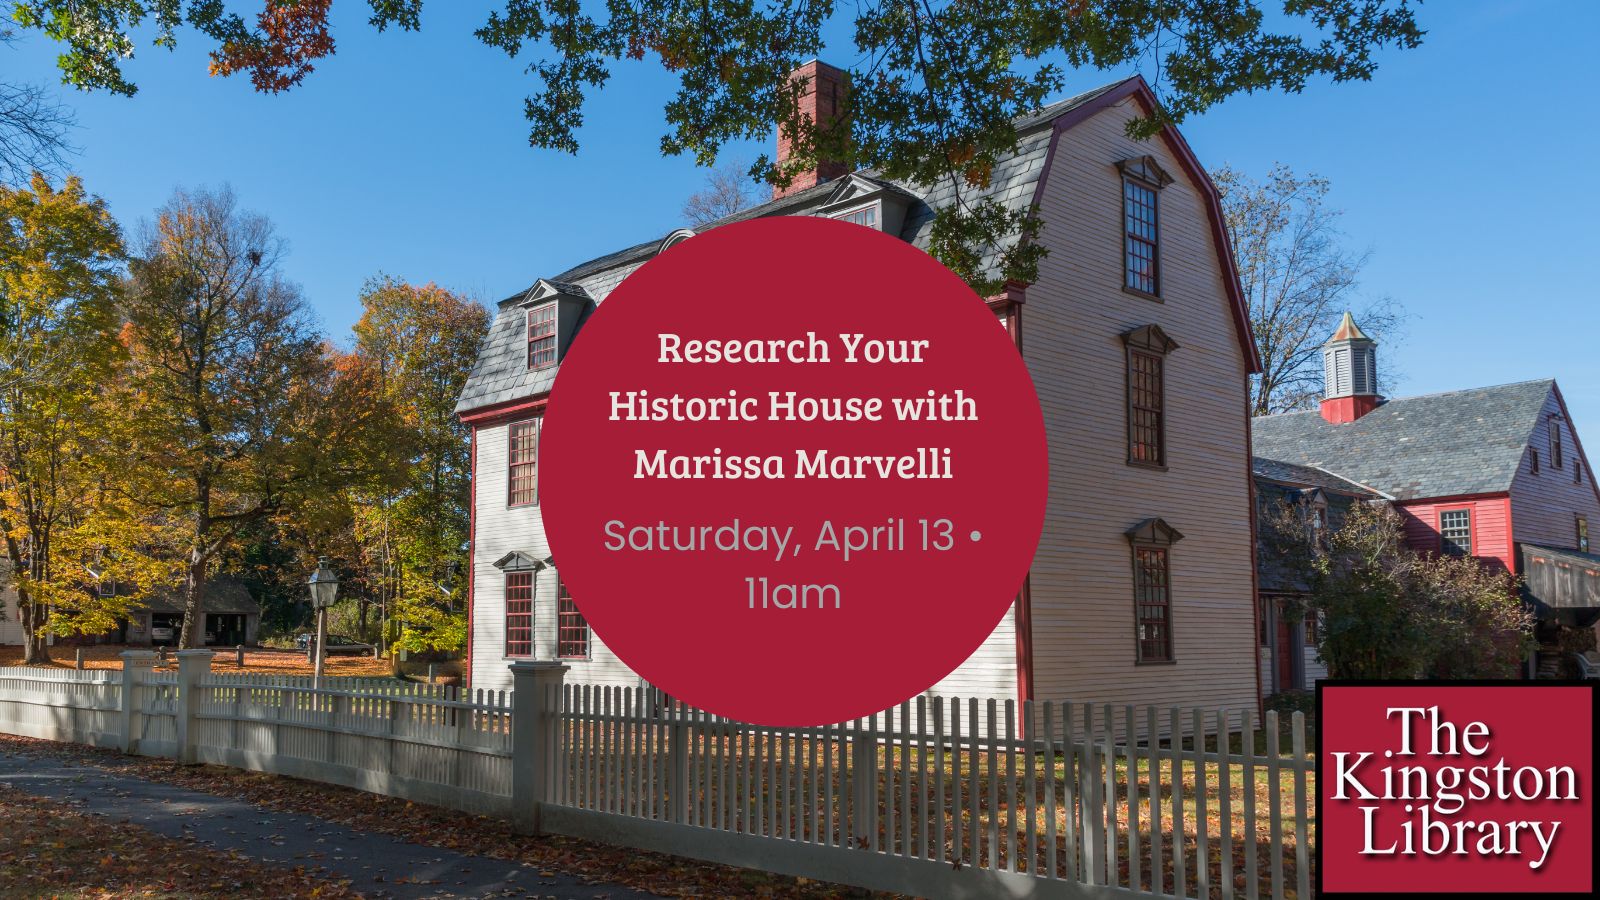 Research Your Historic House with Marissa Marvelli